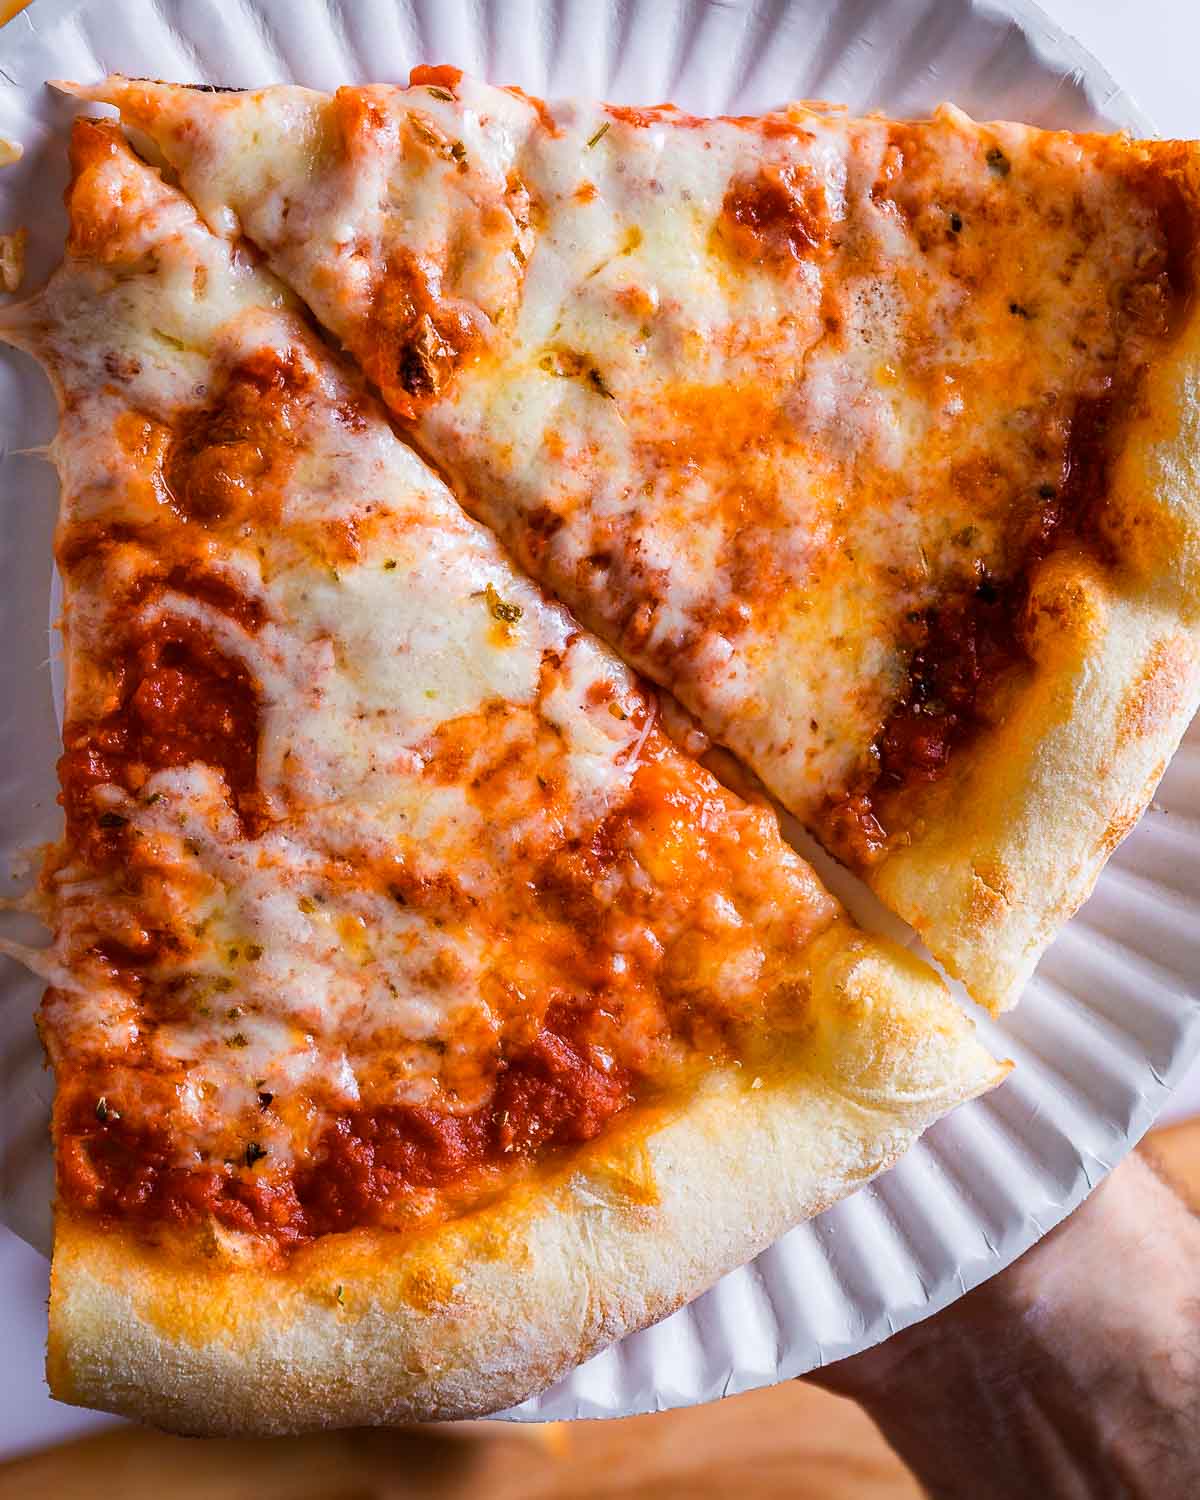 Two slices of homemade New York pizza held in plate.